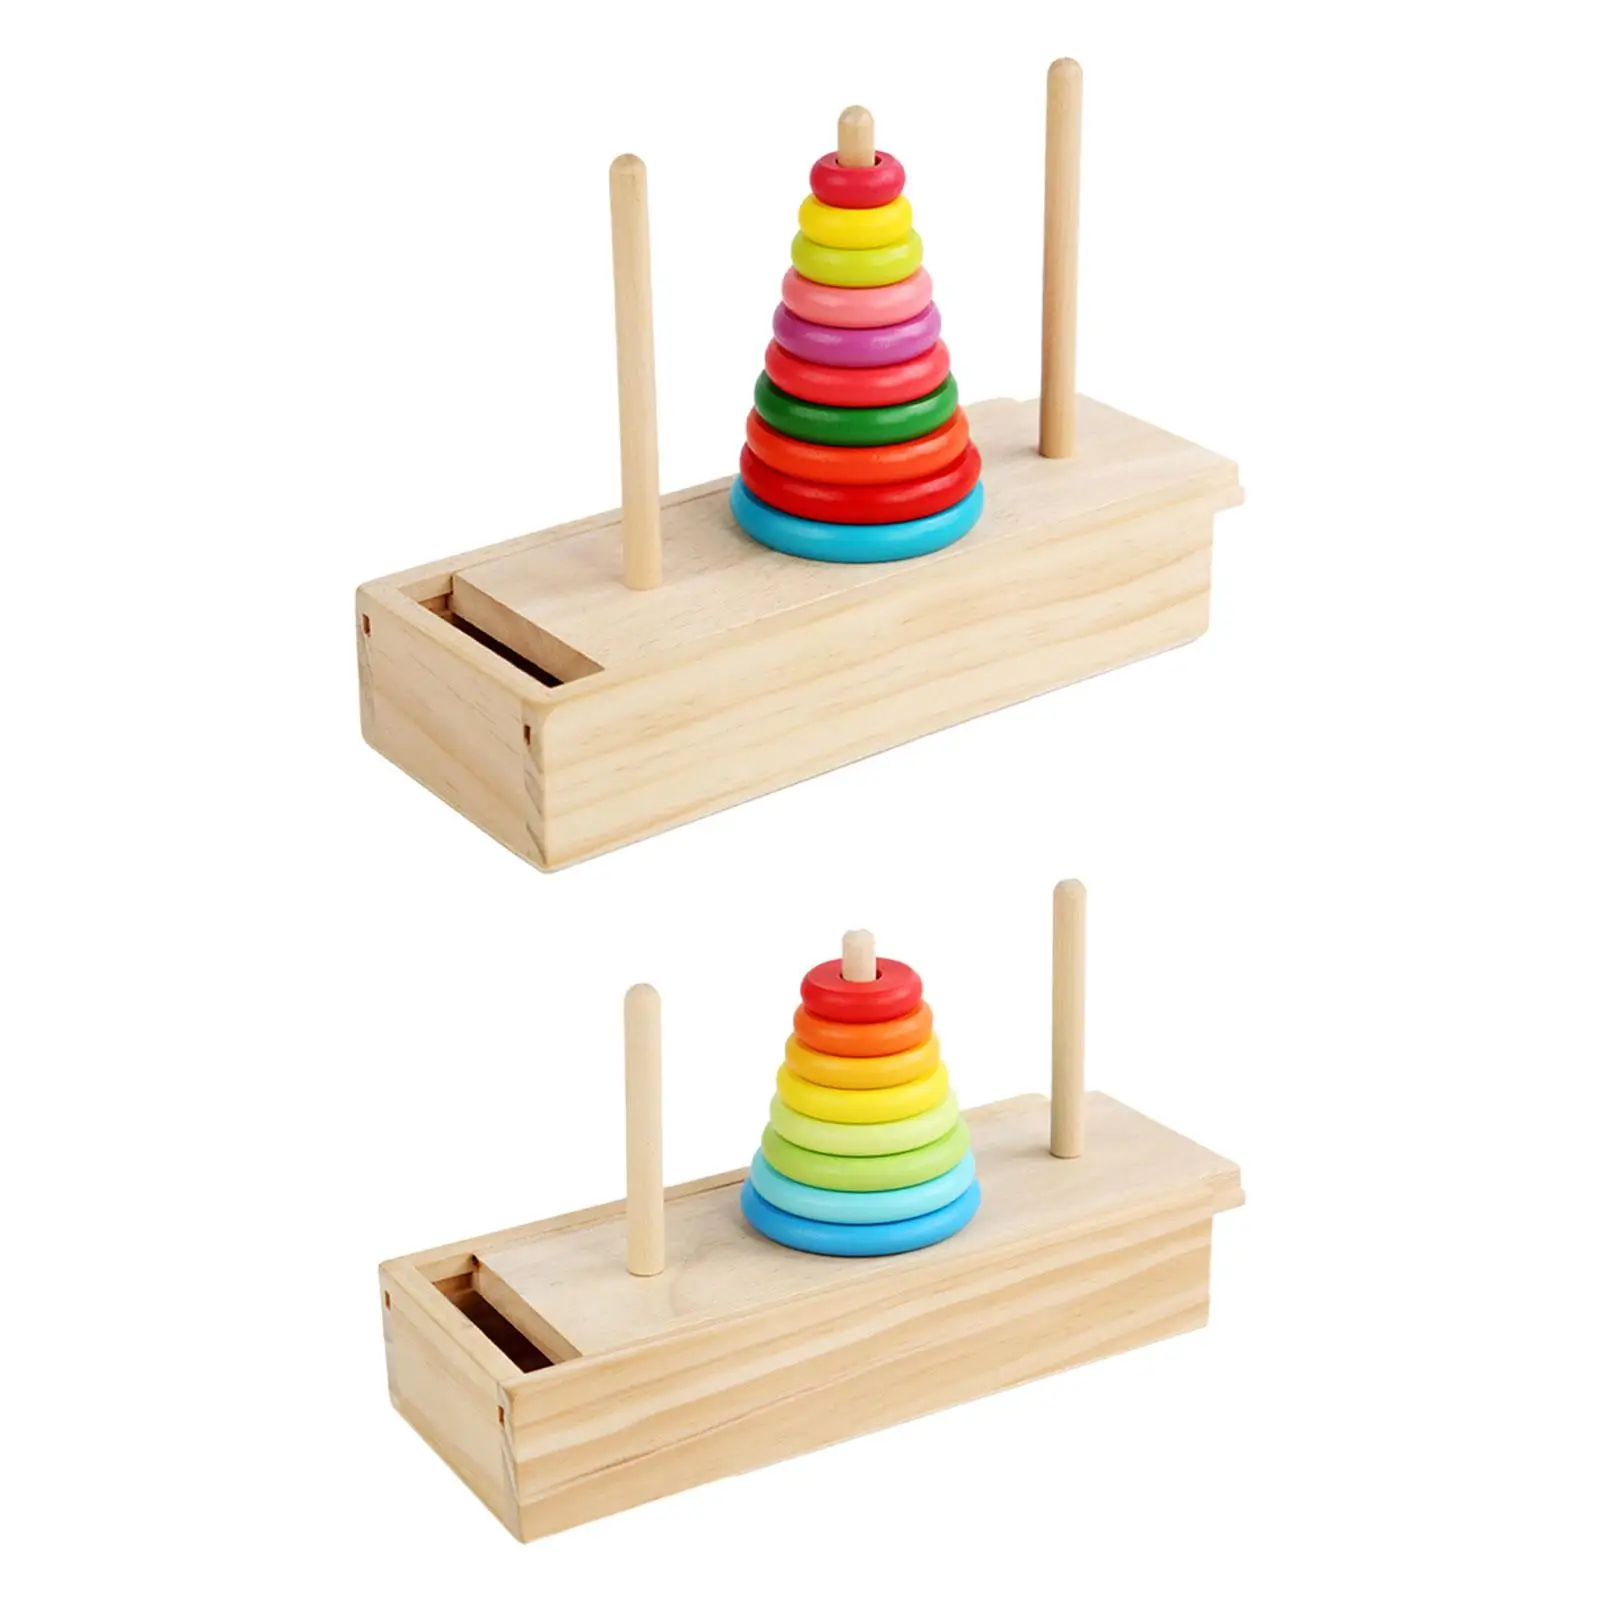 

Wooden Stacking Tower Brain Teaser Birthday Gift with Wooden Box Sturdy Practical for 3 Year Old and up Boys Girls Baby Children